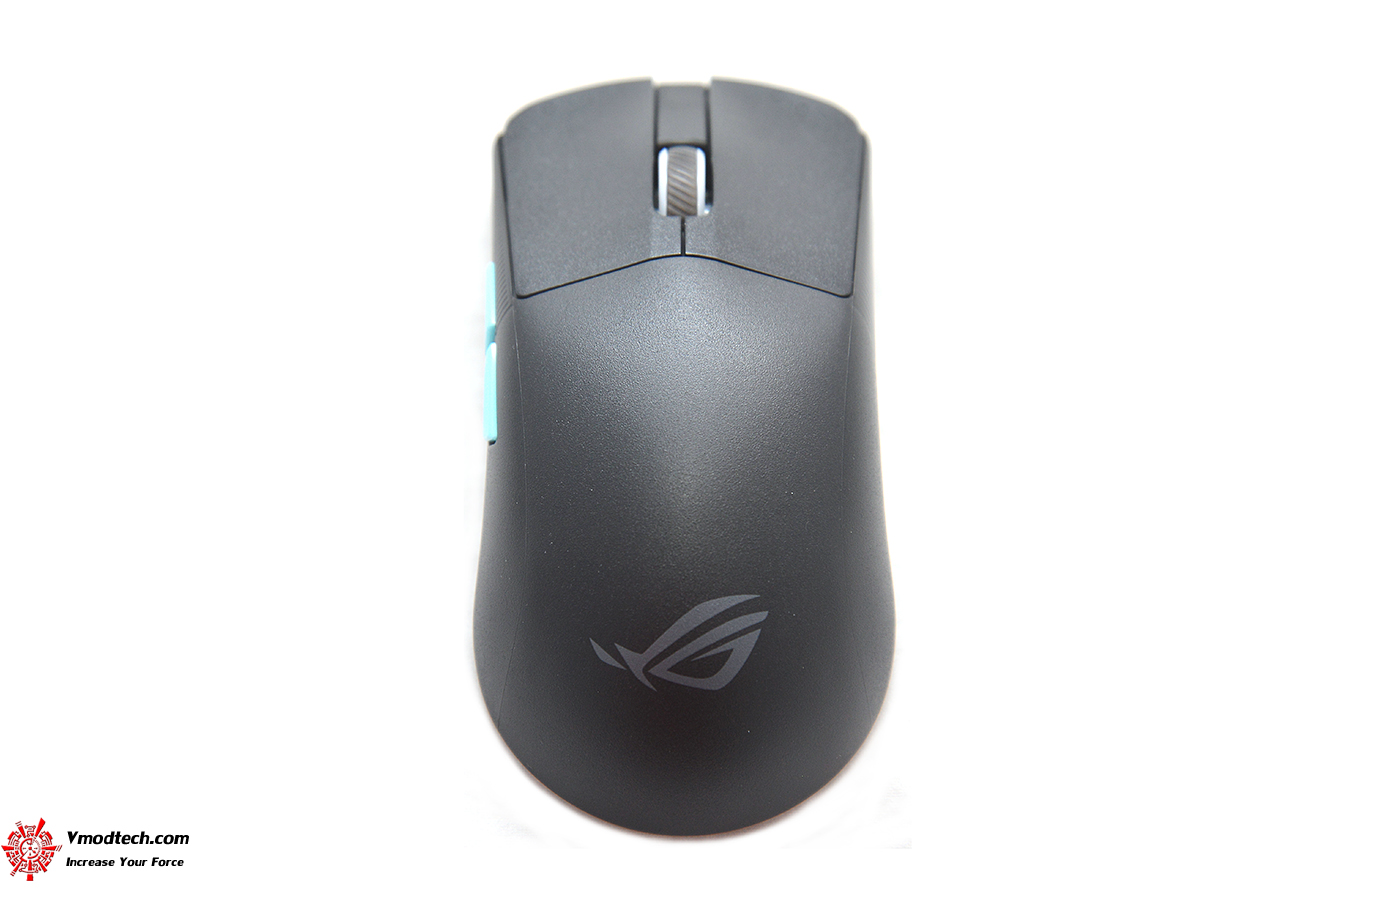 dsc 3823 ROG Harpe Ace Aim Lab Edition Wireless Gaming Mouse Review